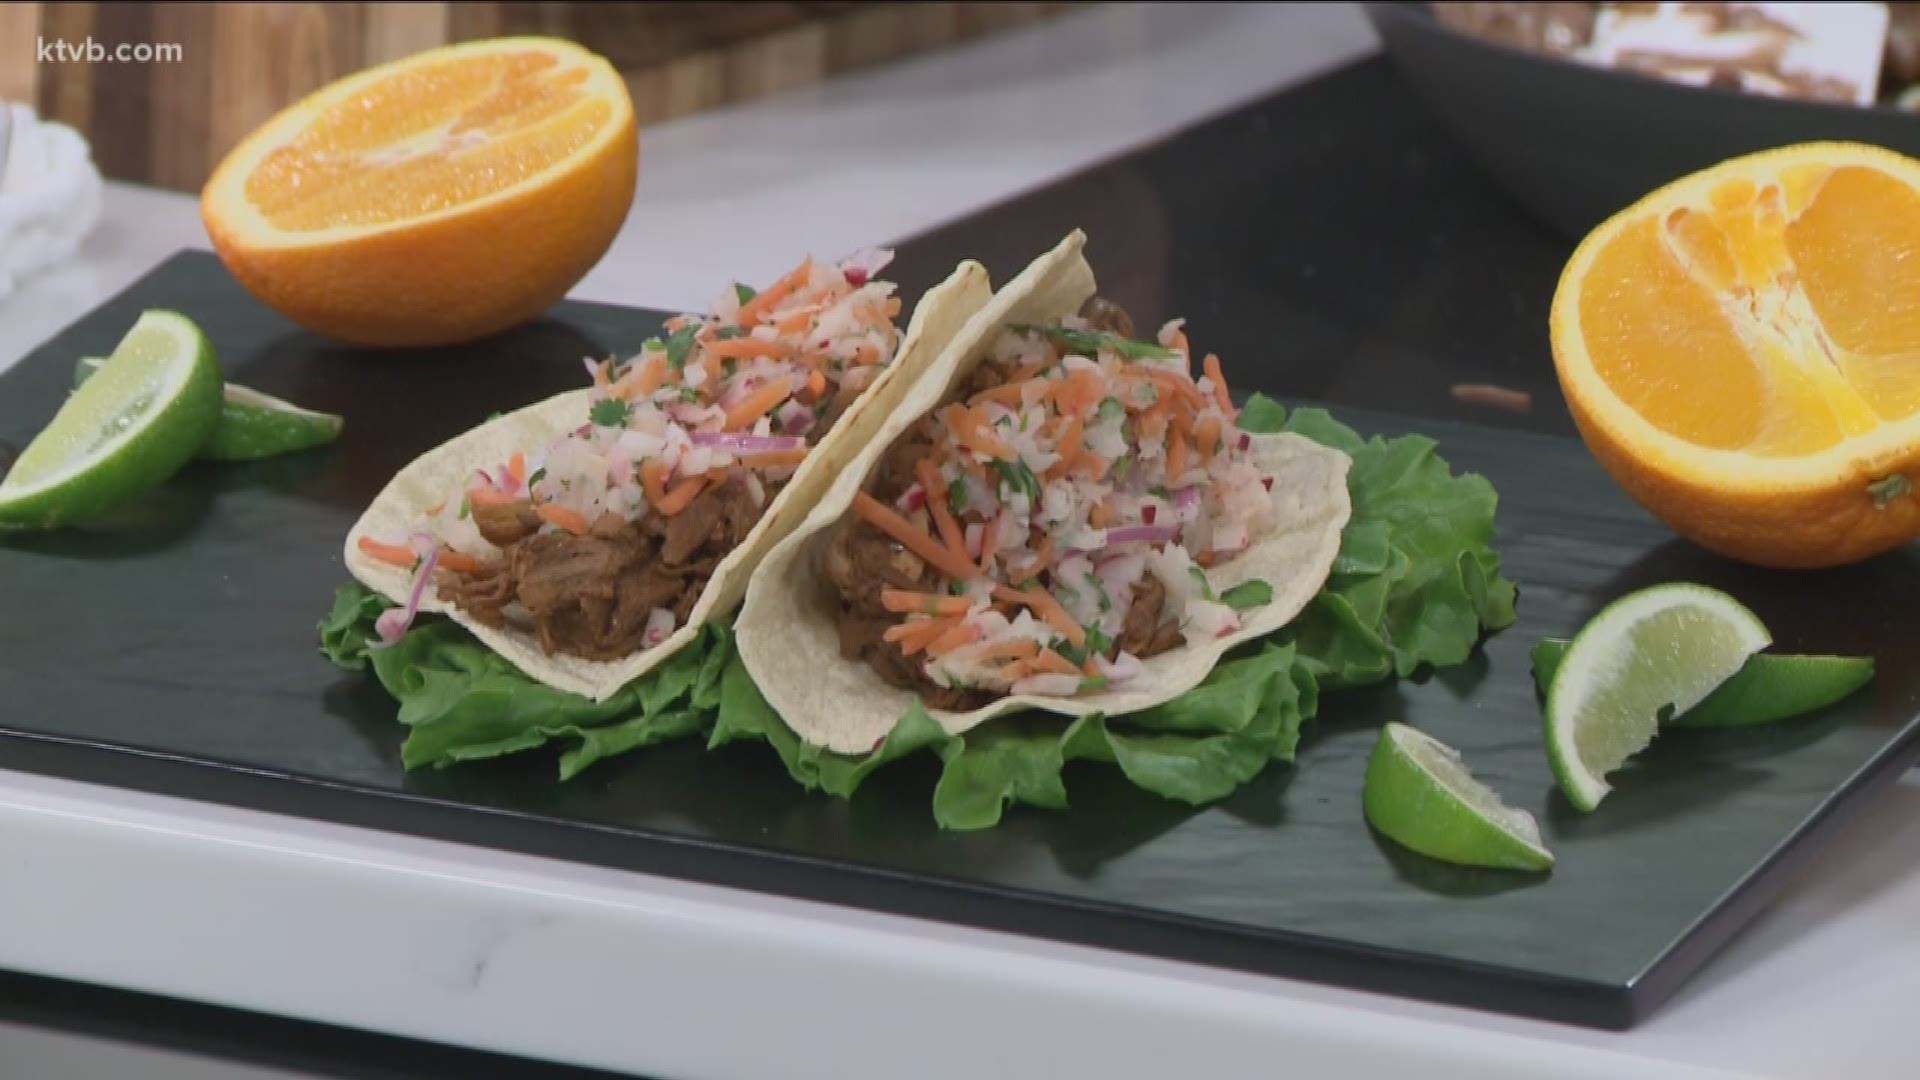 Eating less meat can be a challenge, but jackfruit offers a meaty texture that works wonders as a healthy substitute in these tasty tacos.